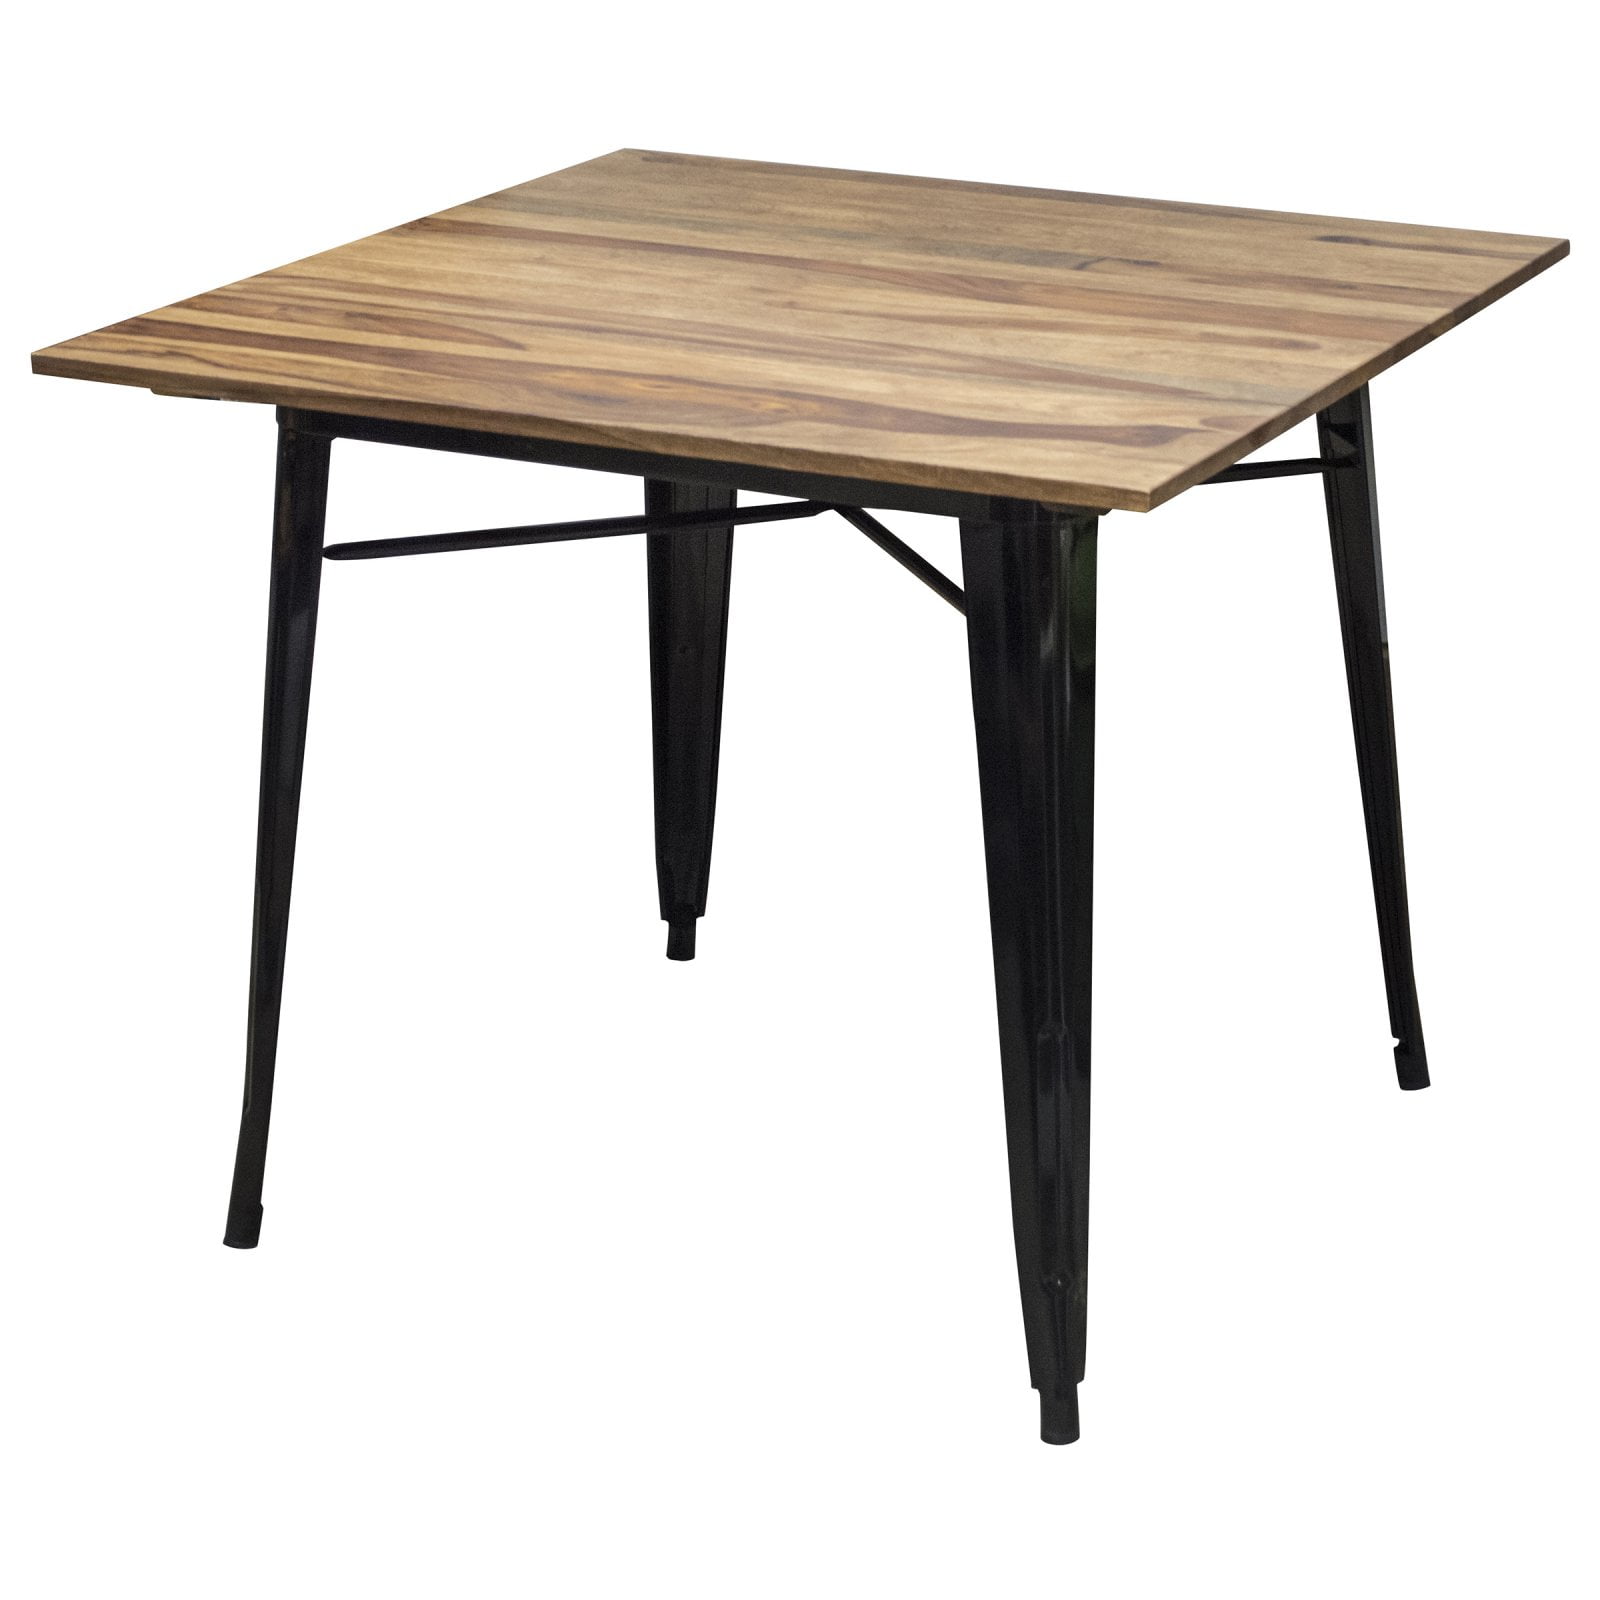 Swtb36 36 X 36 In. Black Dining Table With Rosewood Top, Seats 2 To 4